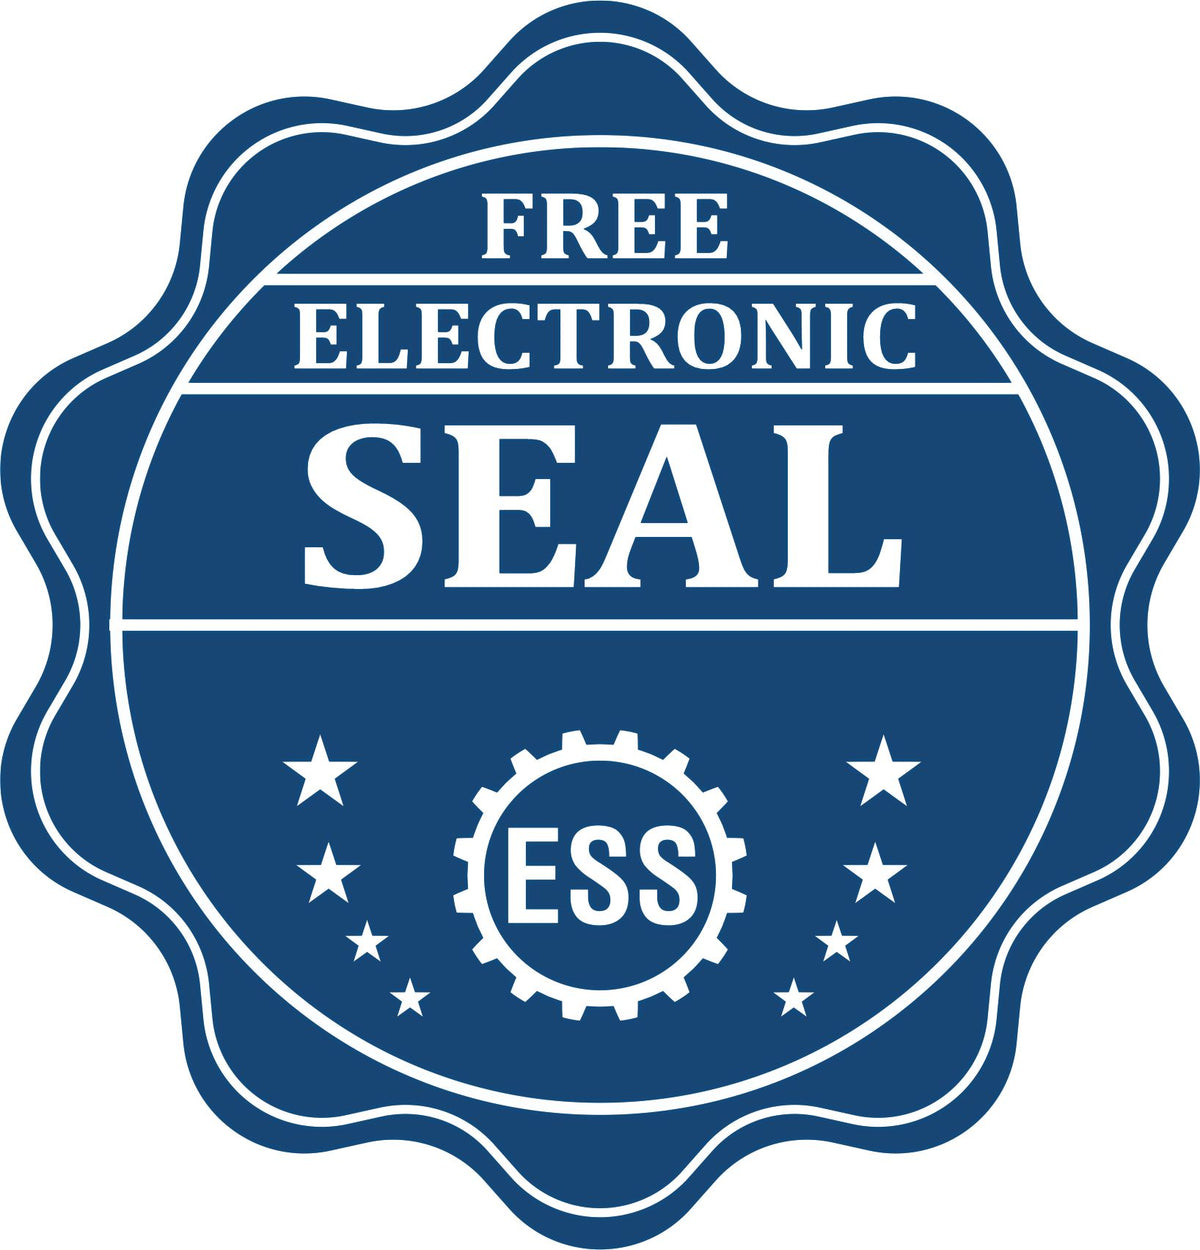 A badge showing a free electronic seal for the Gift Nebraska Geologist Seal with stars and the ESS gear on the emblem.